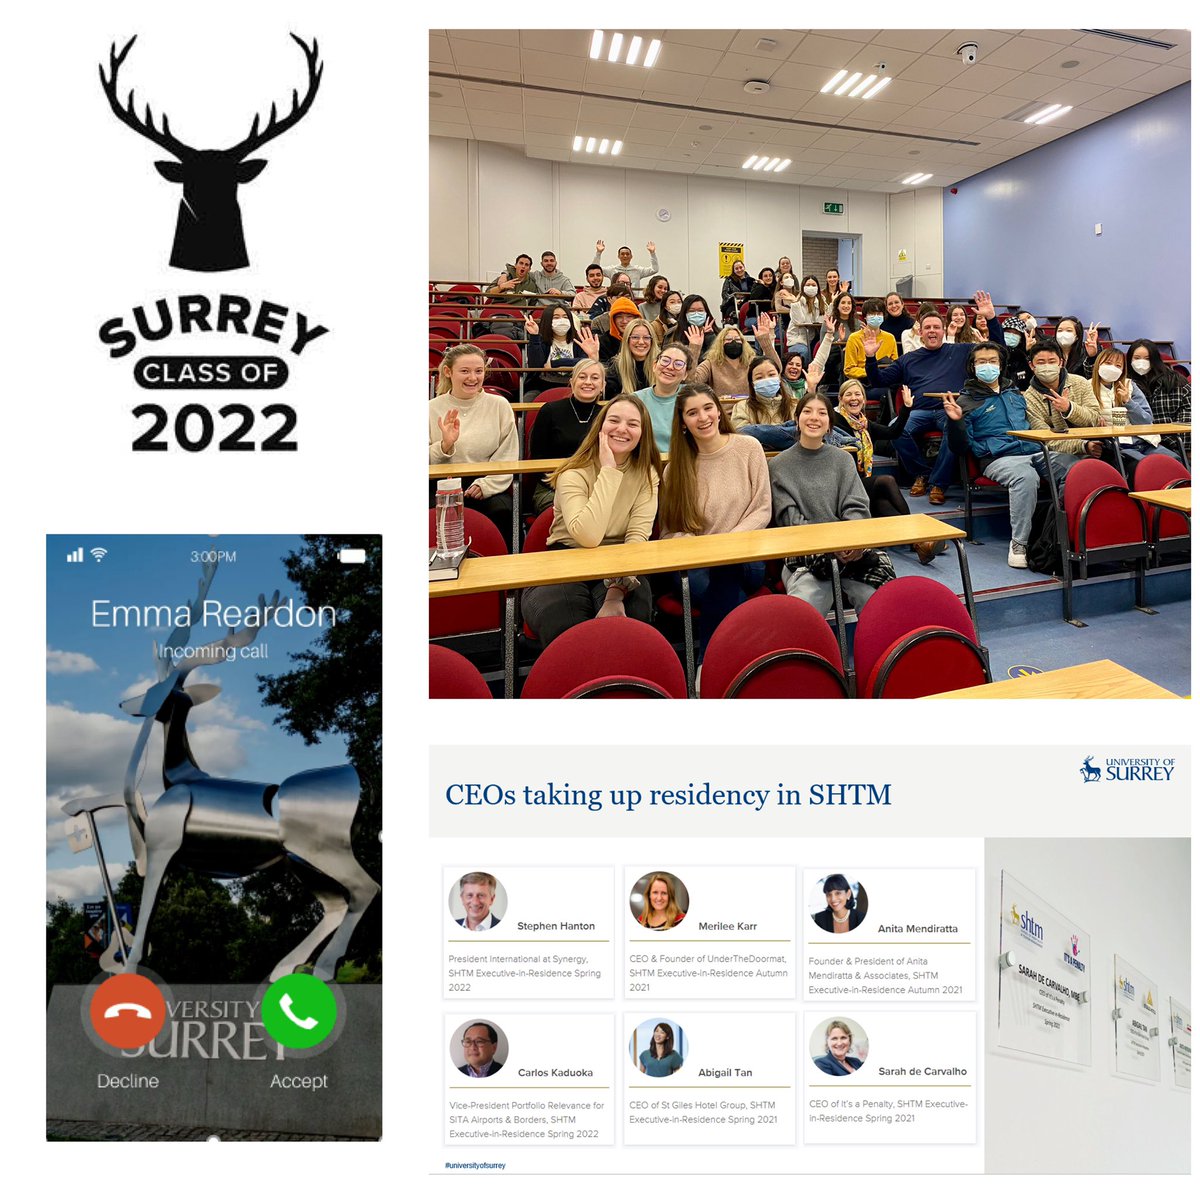 Some words of advice & lots of exciting opportunities shared with our @SHTMatSurrey Level 6 students today as they begin their final semester @UniOfSurrey 

#WonderfulSHTM
#HOSPITALITYatSurrey
#TOURISMatSurrey
#TRANSPORTatSurrey 
#EVENTSatSurrey